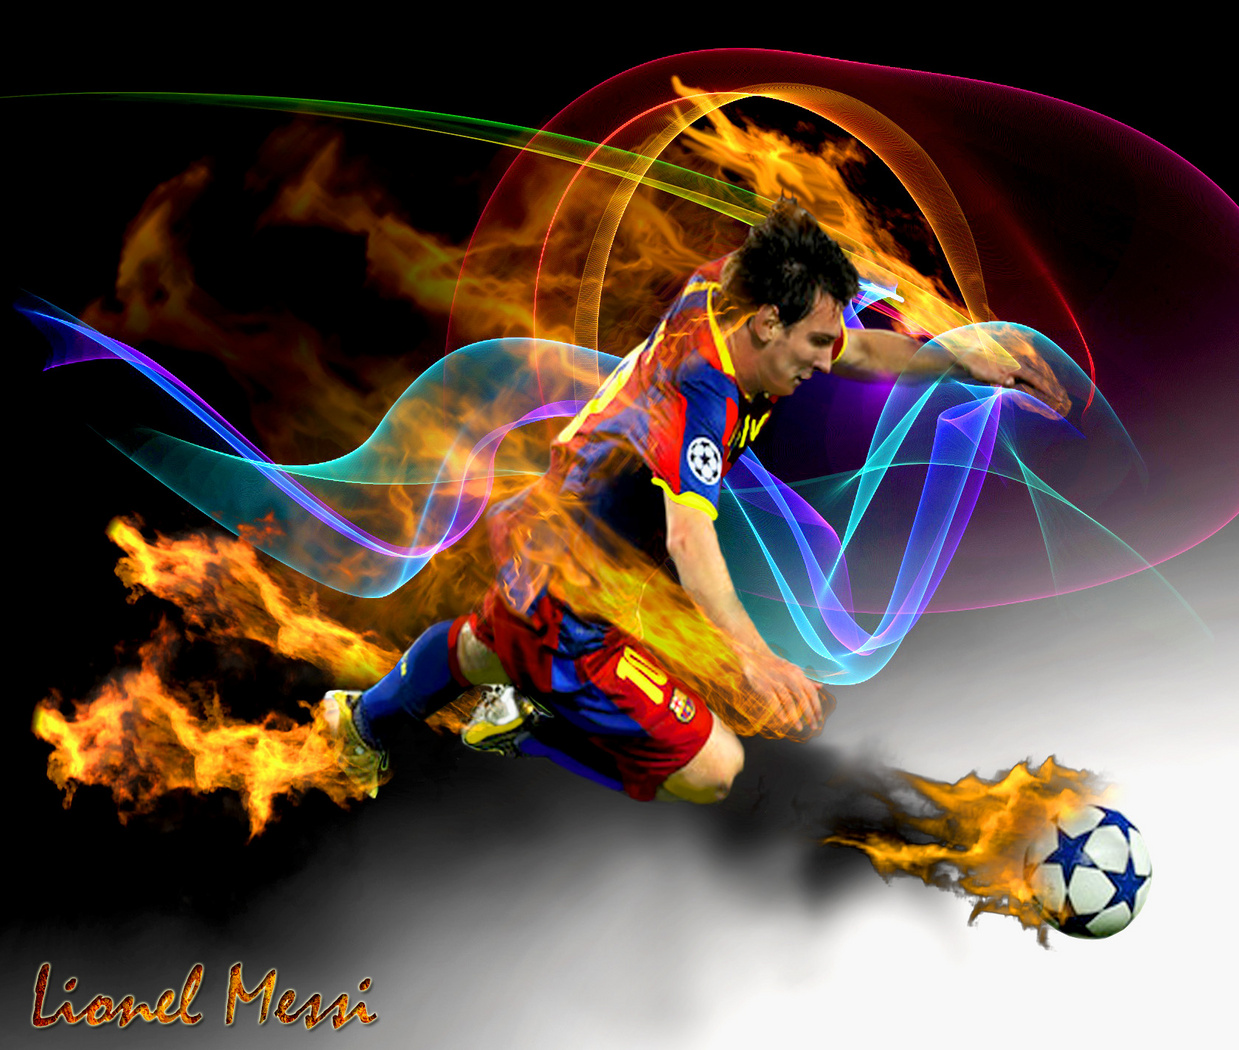 All Wallpapers Lionel Messi hd New Nice Wallpapers